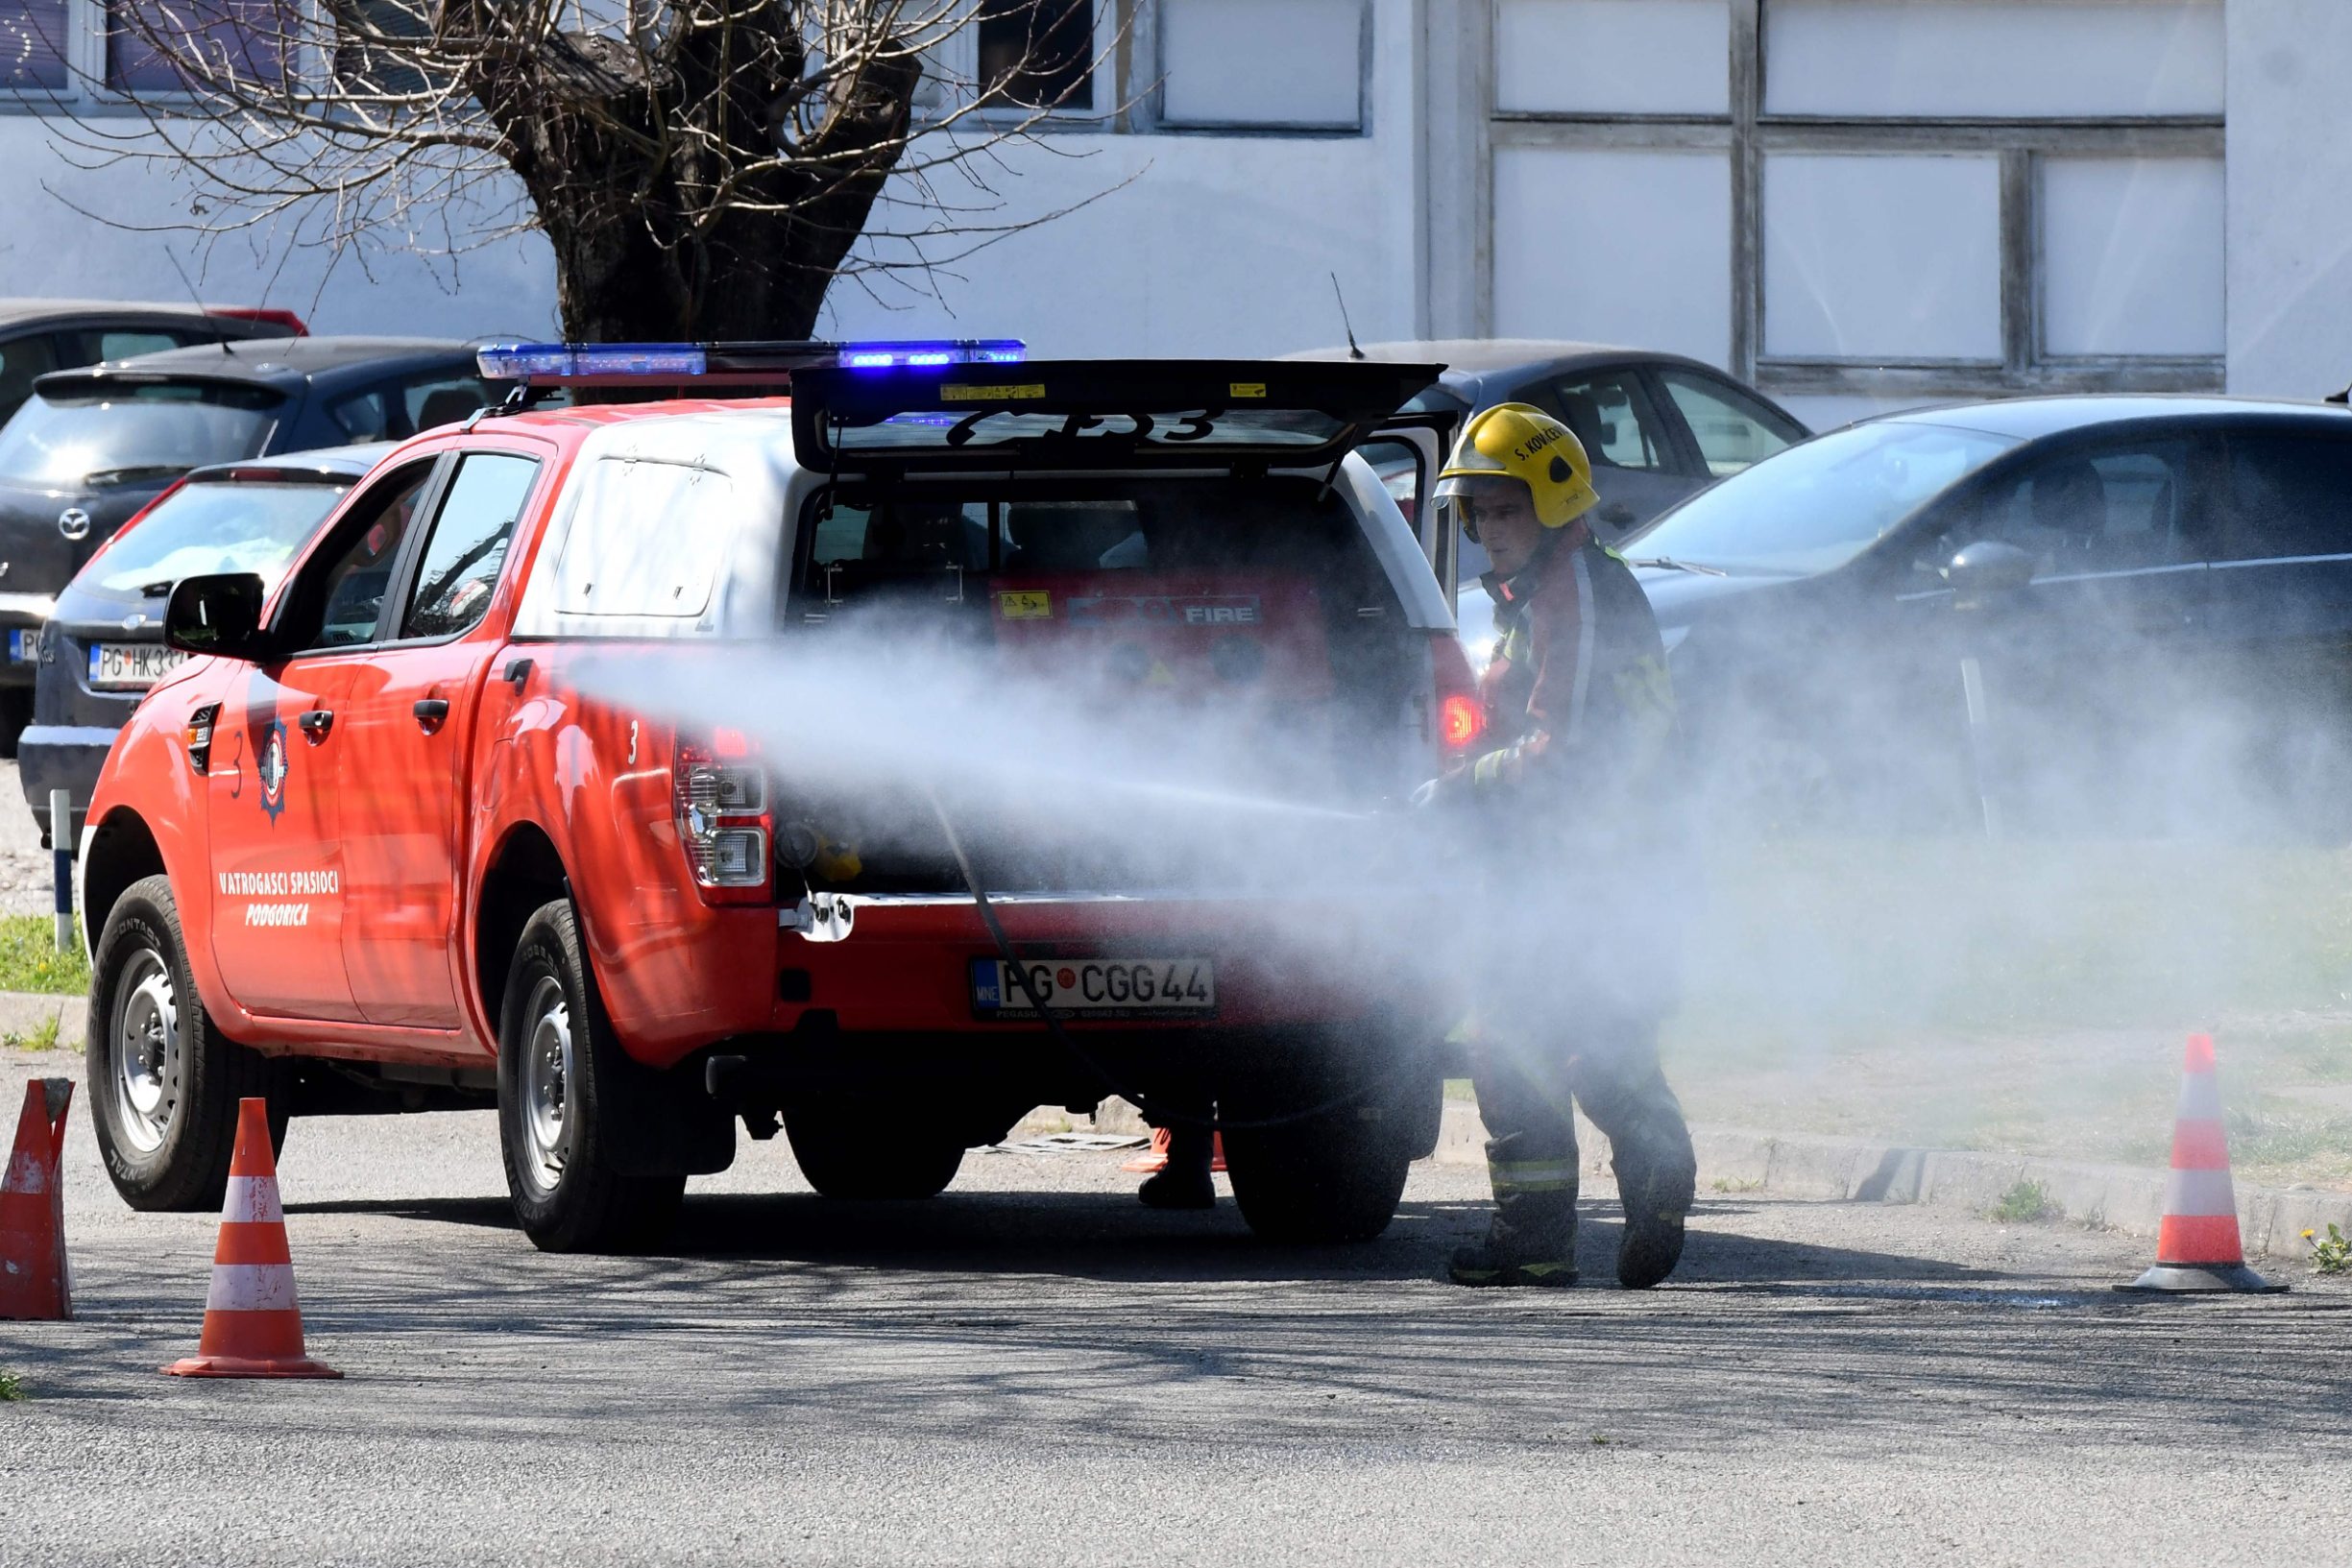 Montenegrin firefighters disinfect the entrance to the Medical center in capital Podgorica, on March 20, 2020, amid the outbreak of COVID-19, caused by the coronavirus. - Montenegro, which has detected 13 confirmed infections of COVID-19 so far, issued strict measures, including a closure of schools, ban on public gatherings, and restrictions of land and sea passenger transport. (Photo by Savo PRELEVIC / AFP)